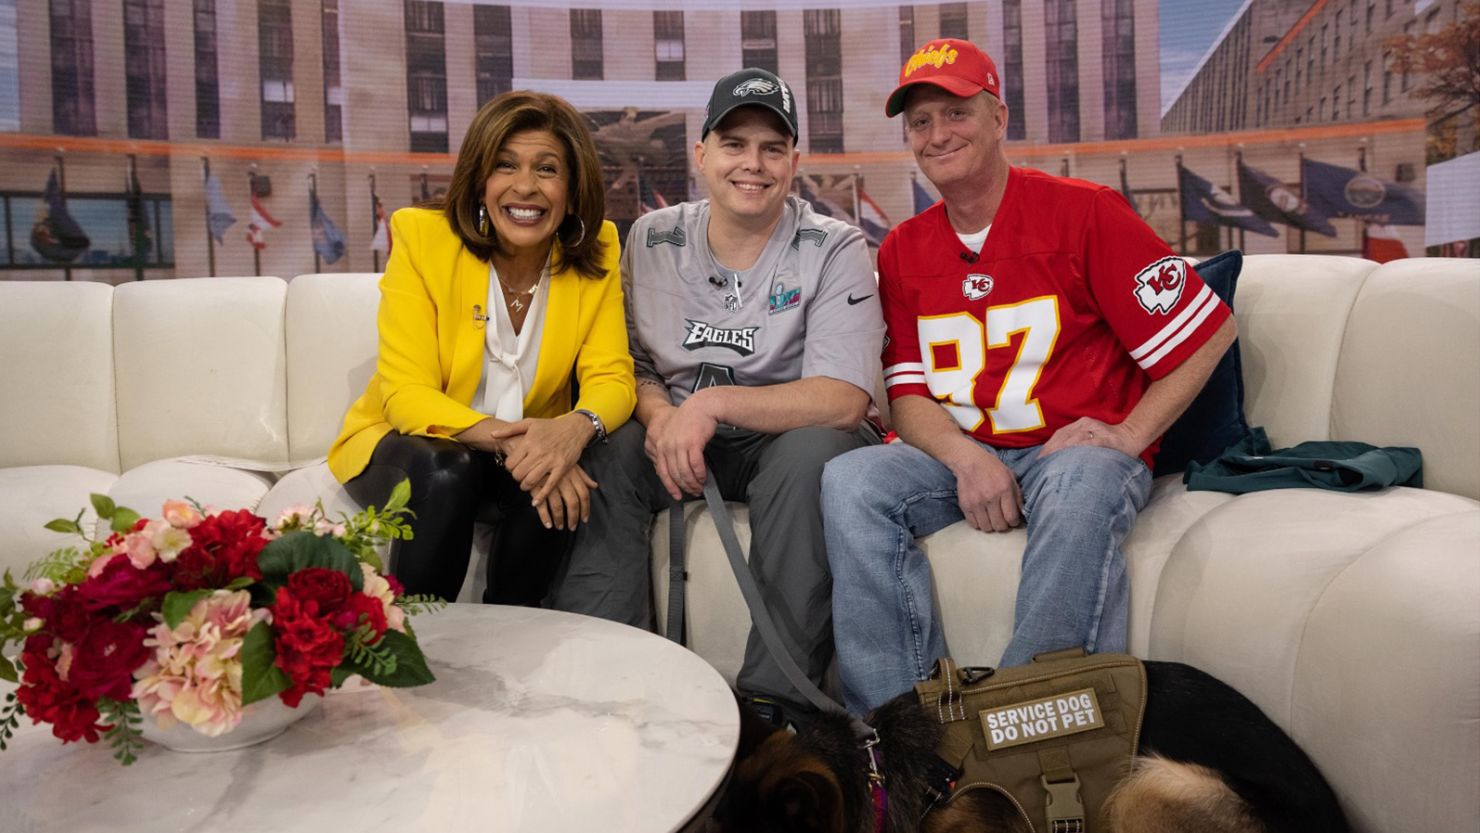 Philadelphia Eagles fan Billy Welsh will sit next to Kansas City Chiefs fan John Gladwell at Sunday's game after Gladwell donated his kidney to Welsh years ago.